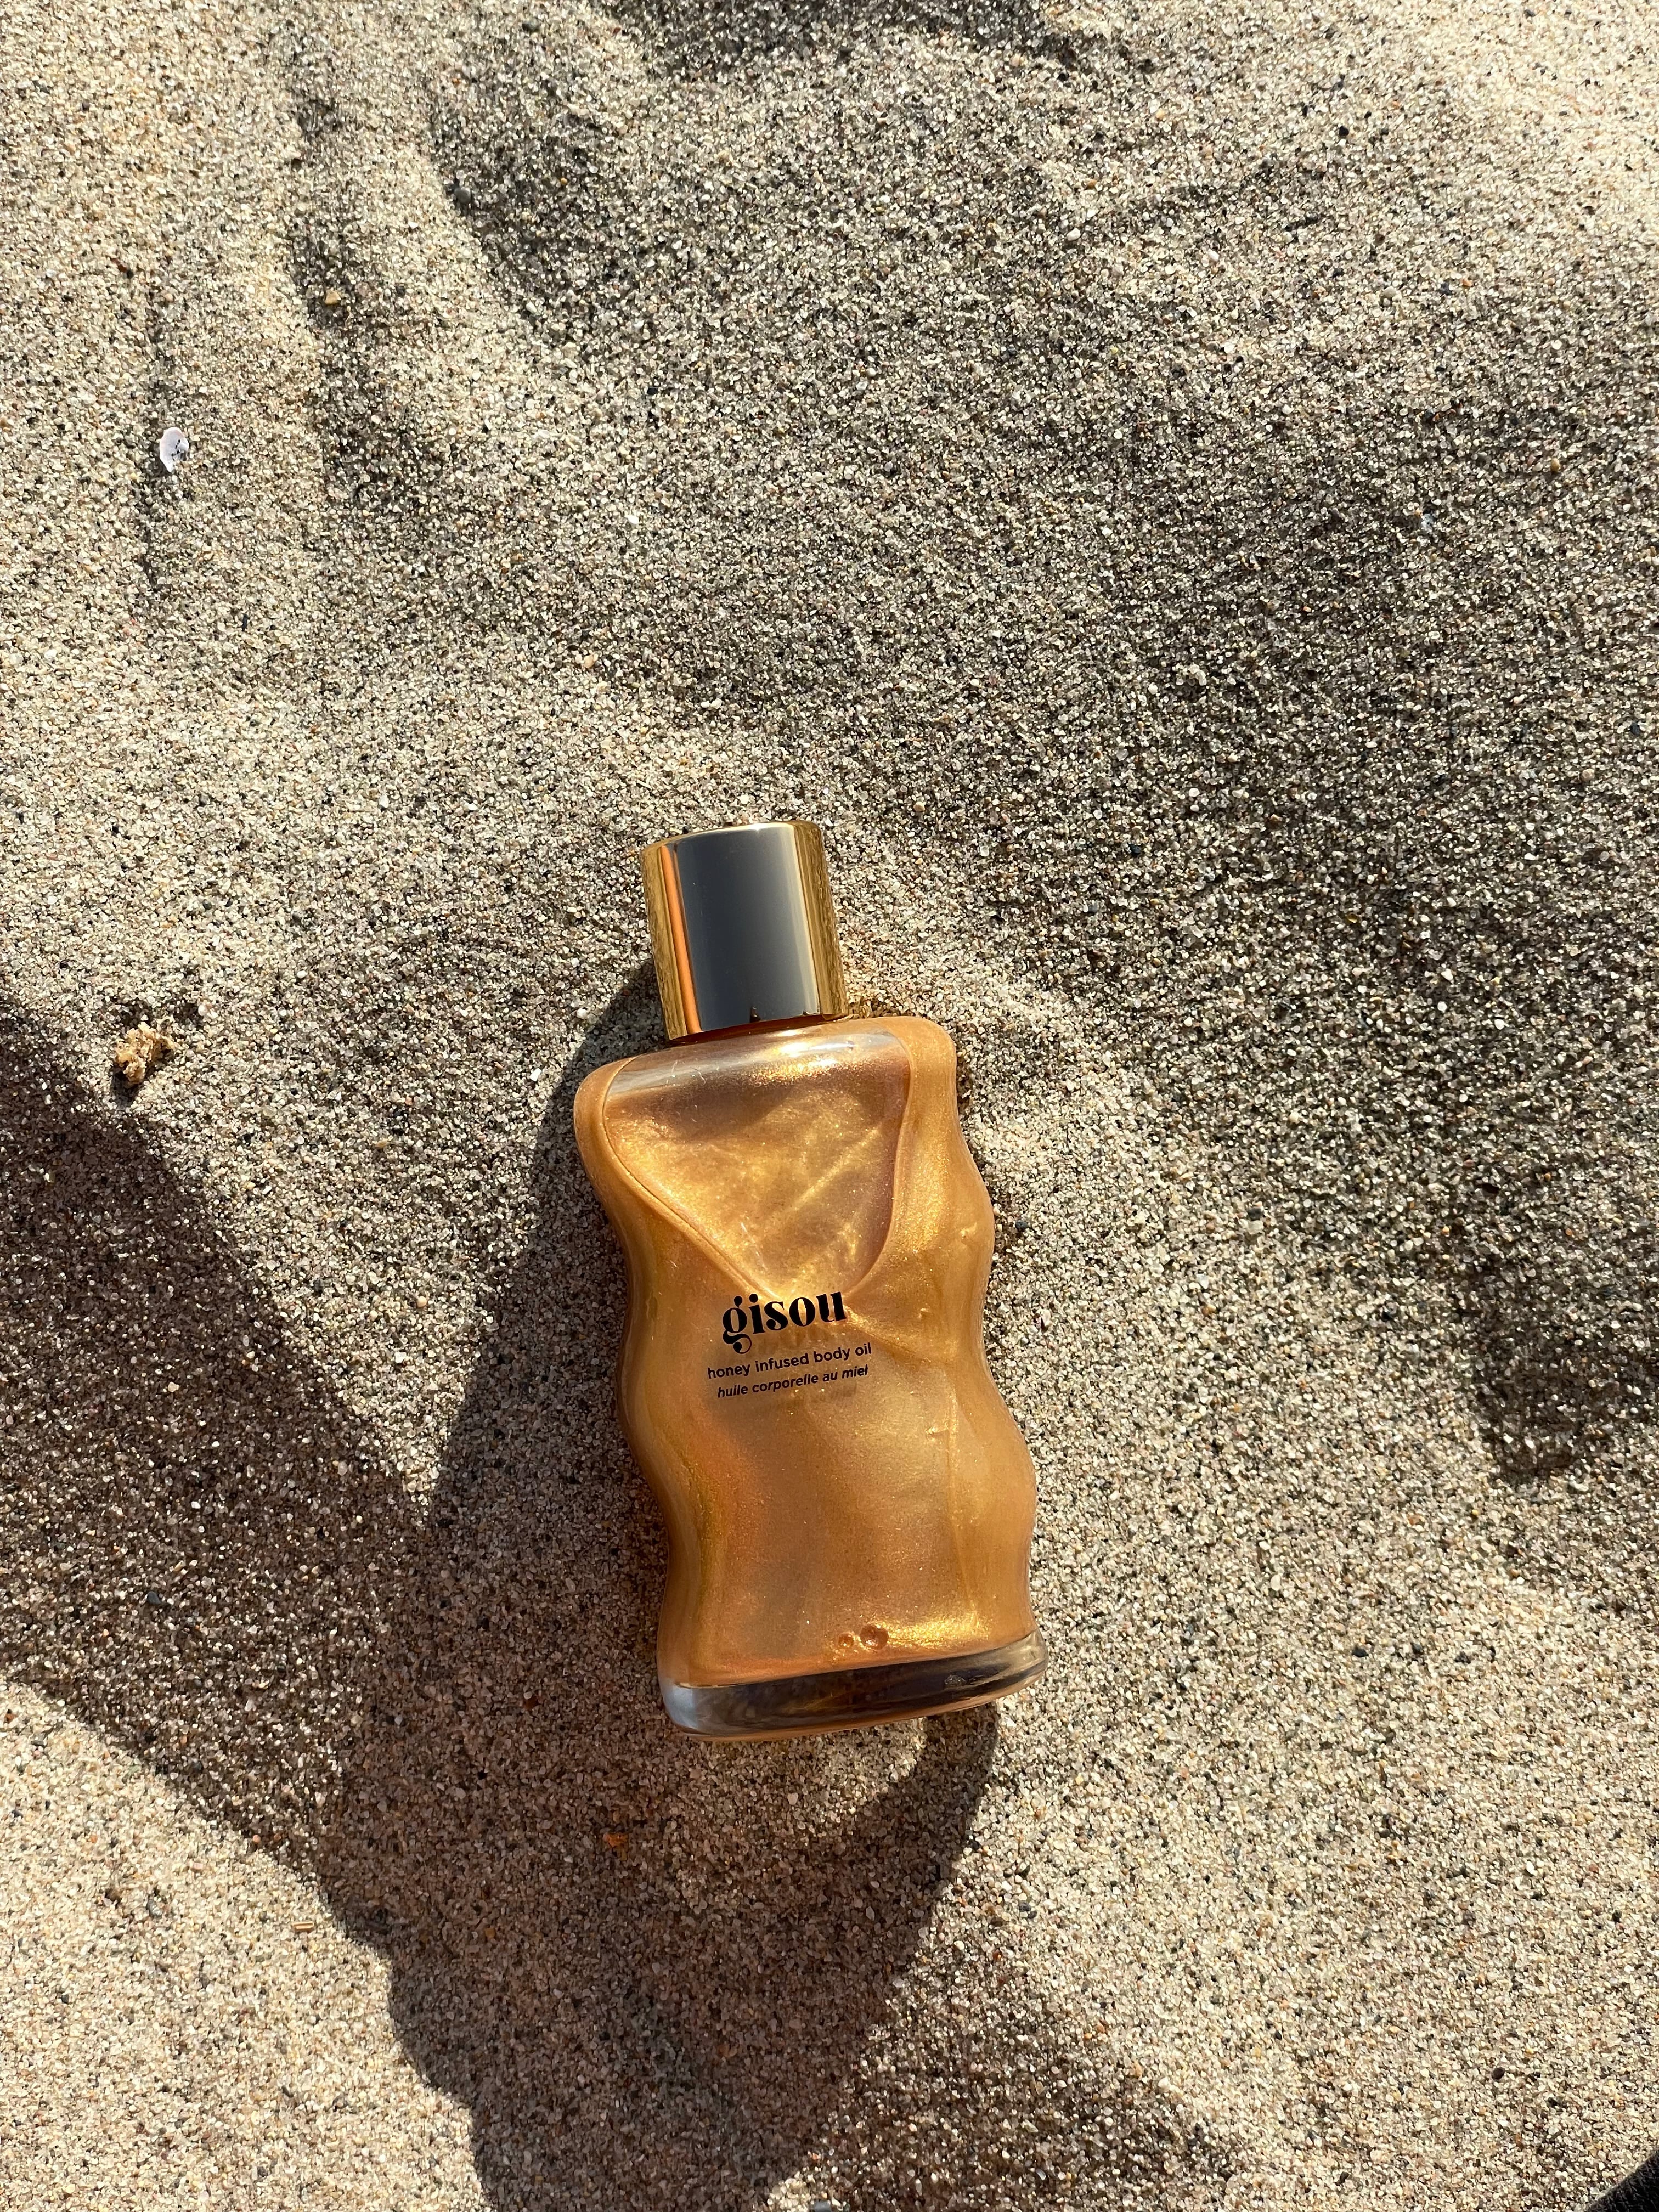 Gisou Golden Shimmer Body Oil Review With Pics